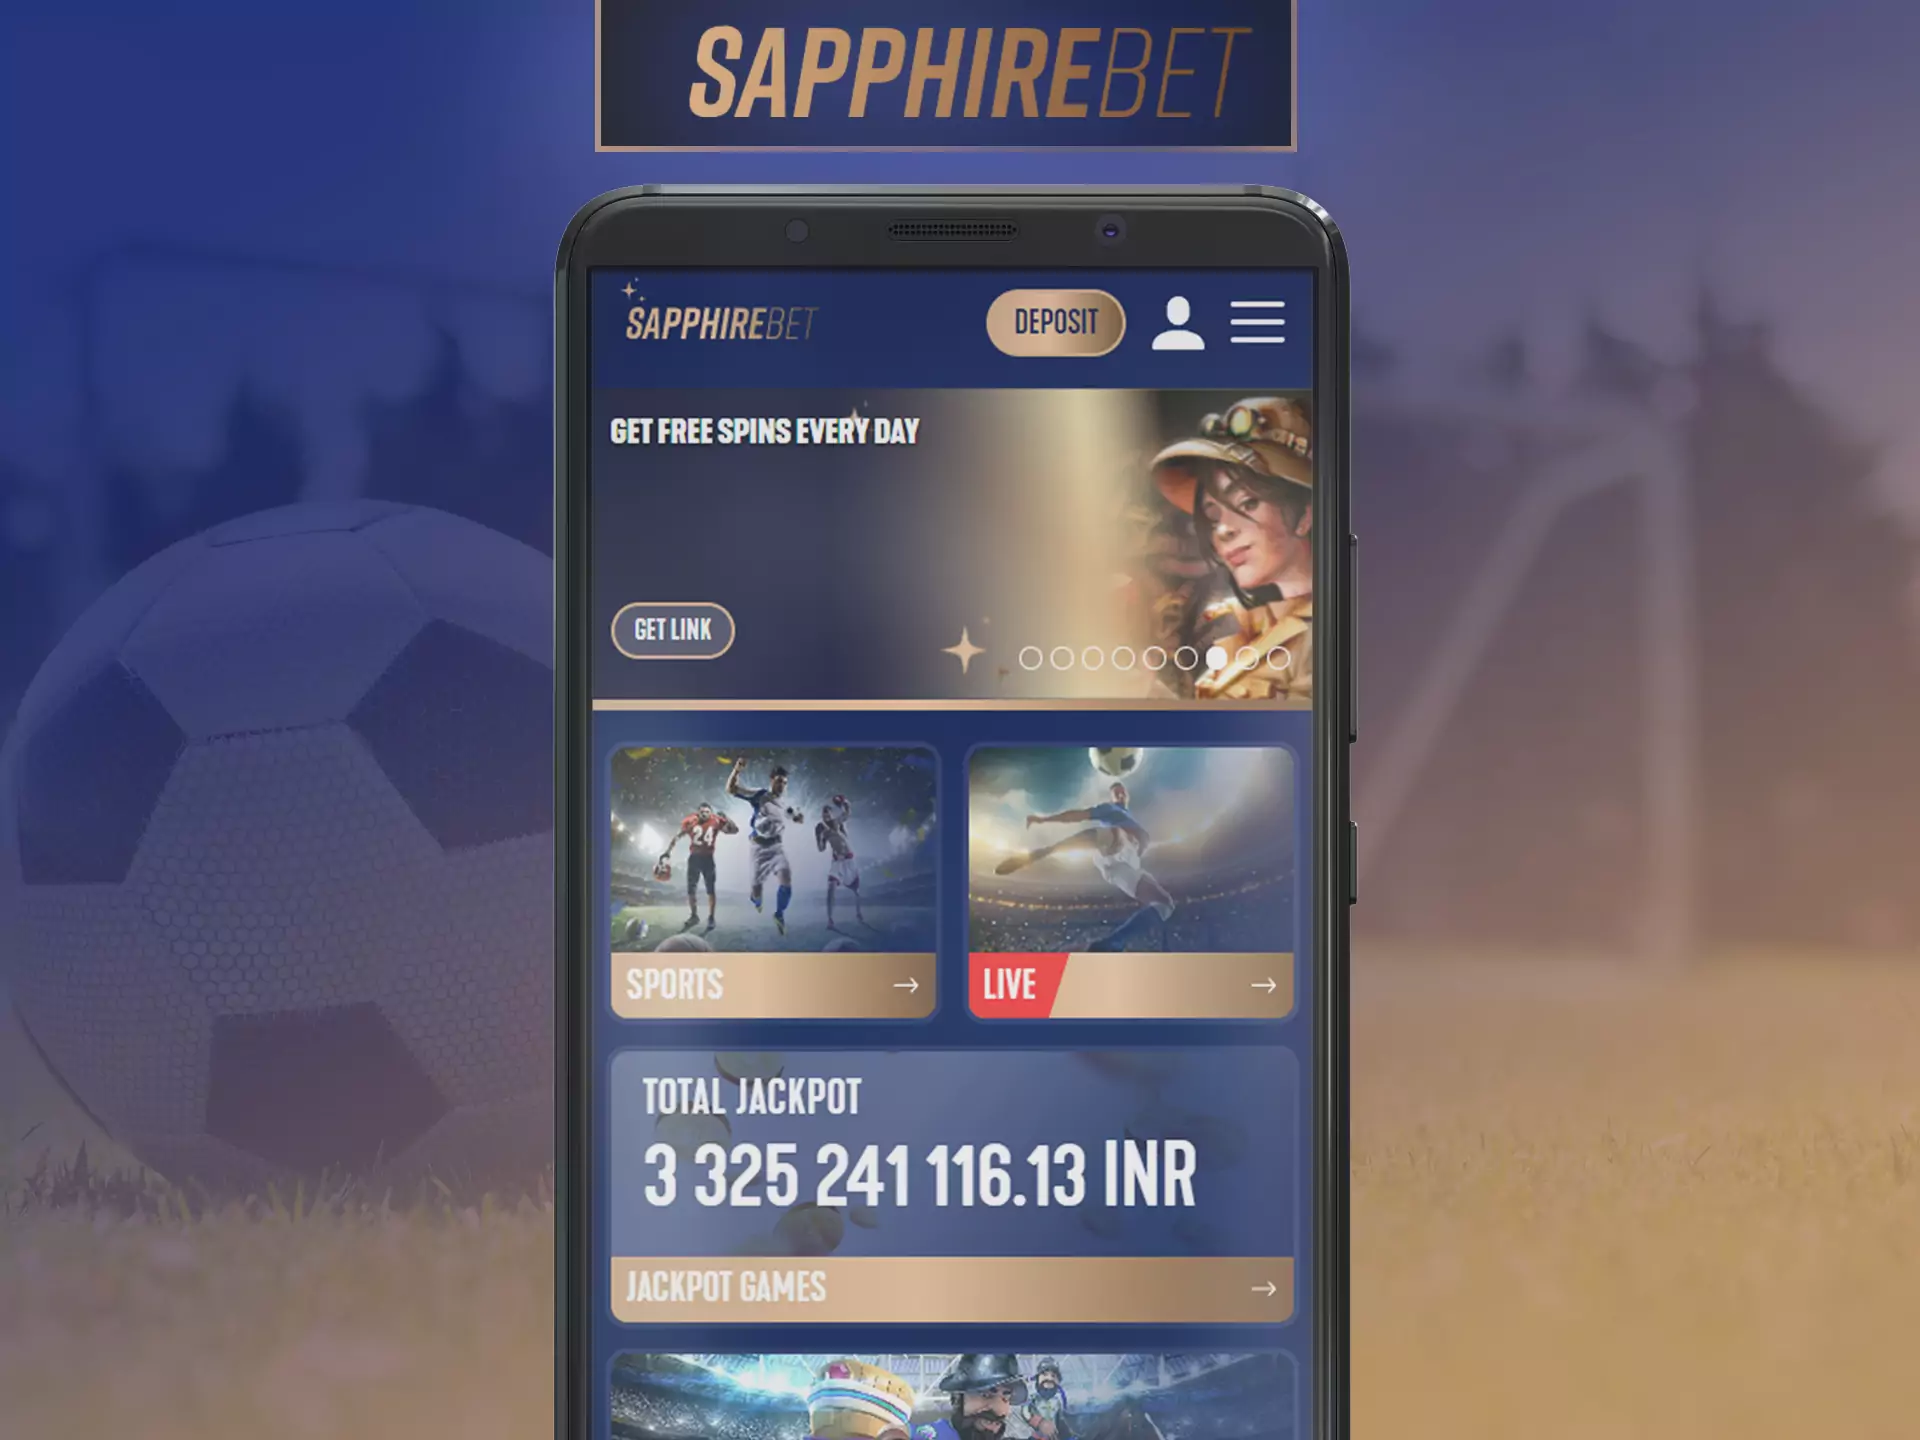 Try out all the features and bonuses of Sapphirebet on the mobile version of the site.